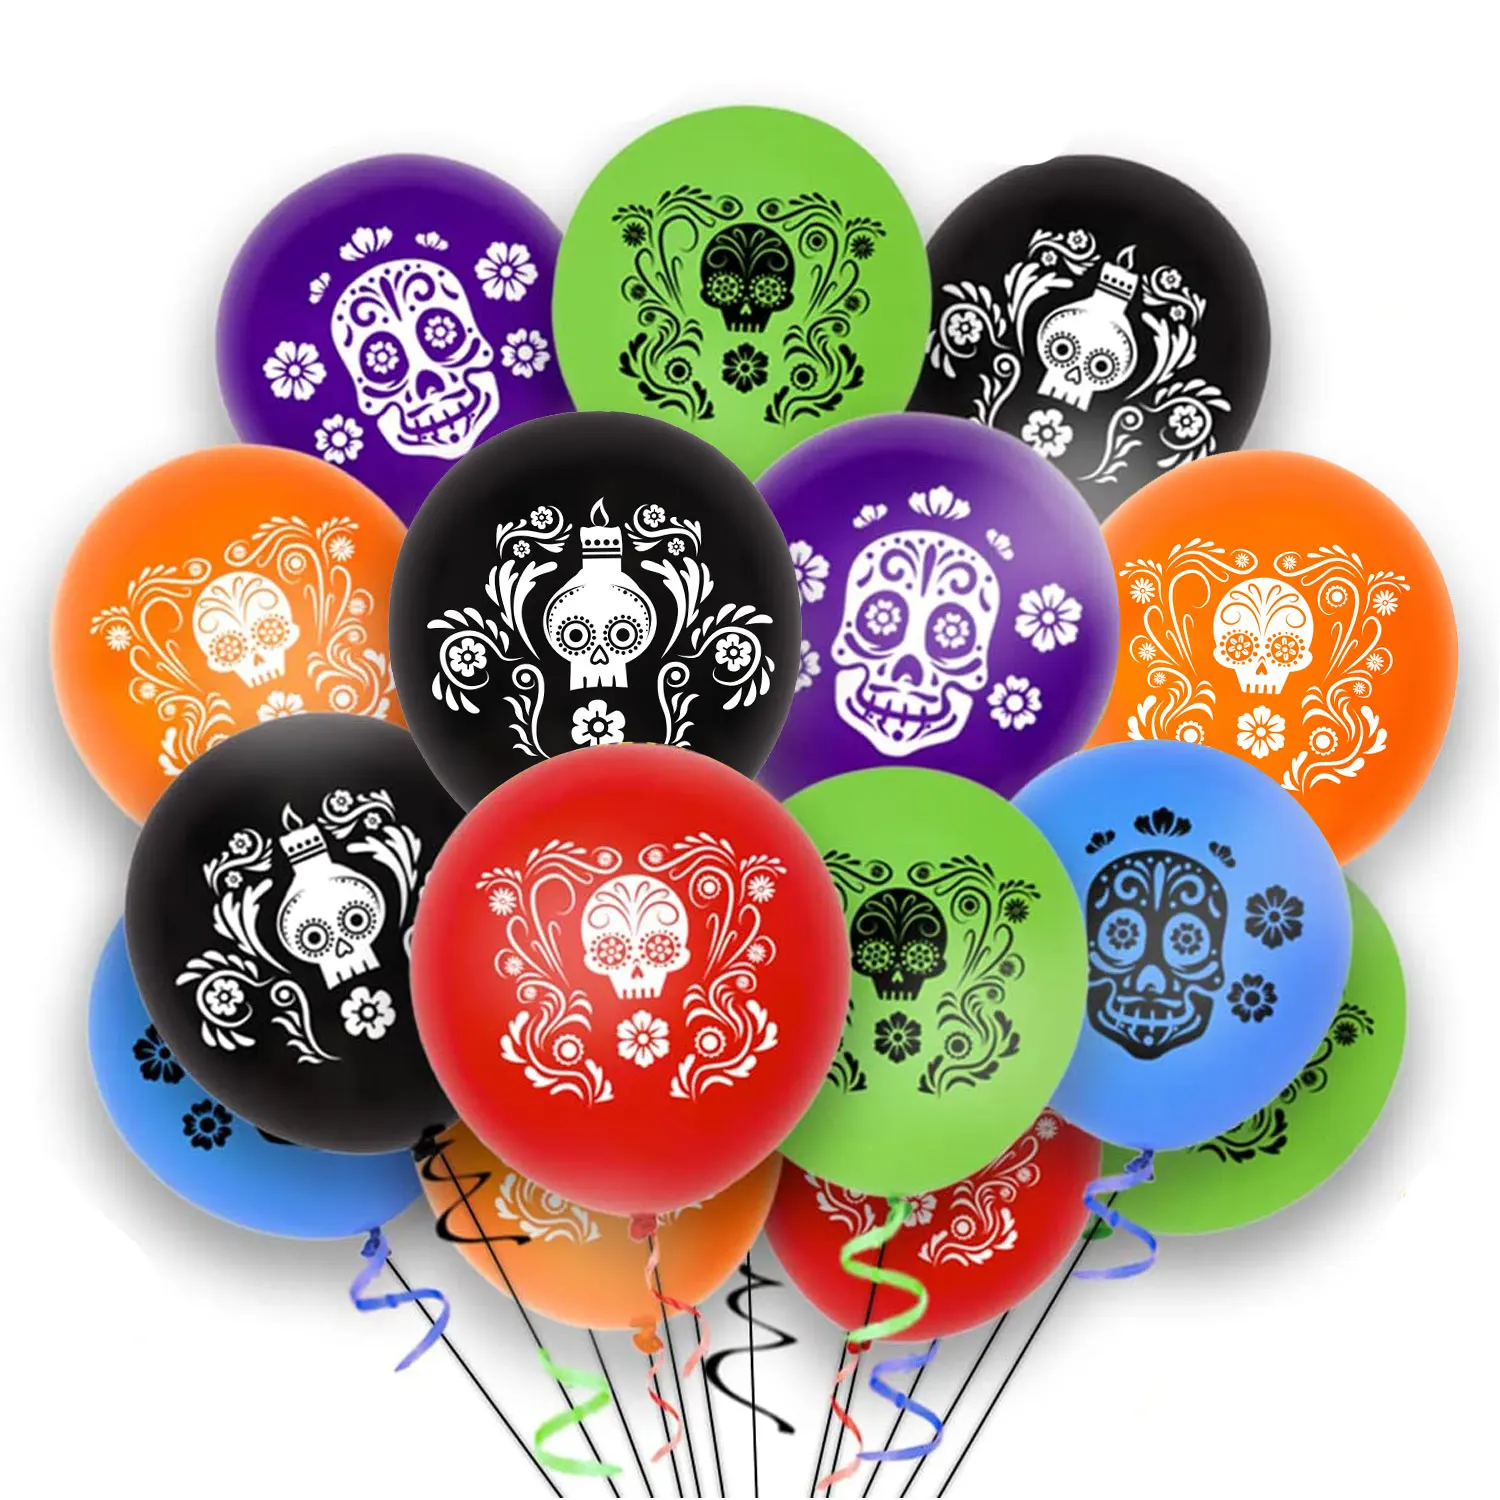 36 Pcs Day of the Dead Balloons, 12 Inches Skull Latex Balloons for Day of the Dead, Mexican Festival Holiday Party Decorations